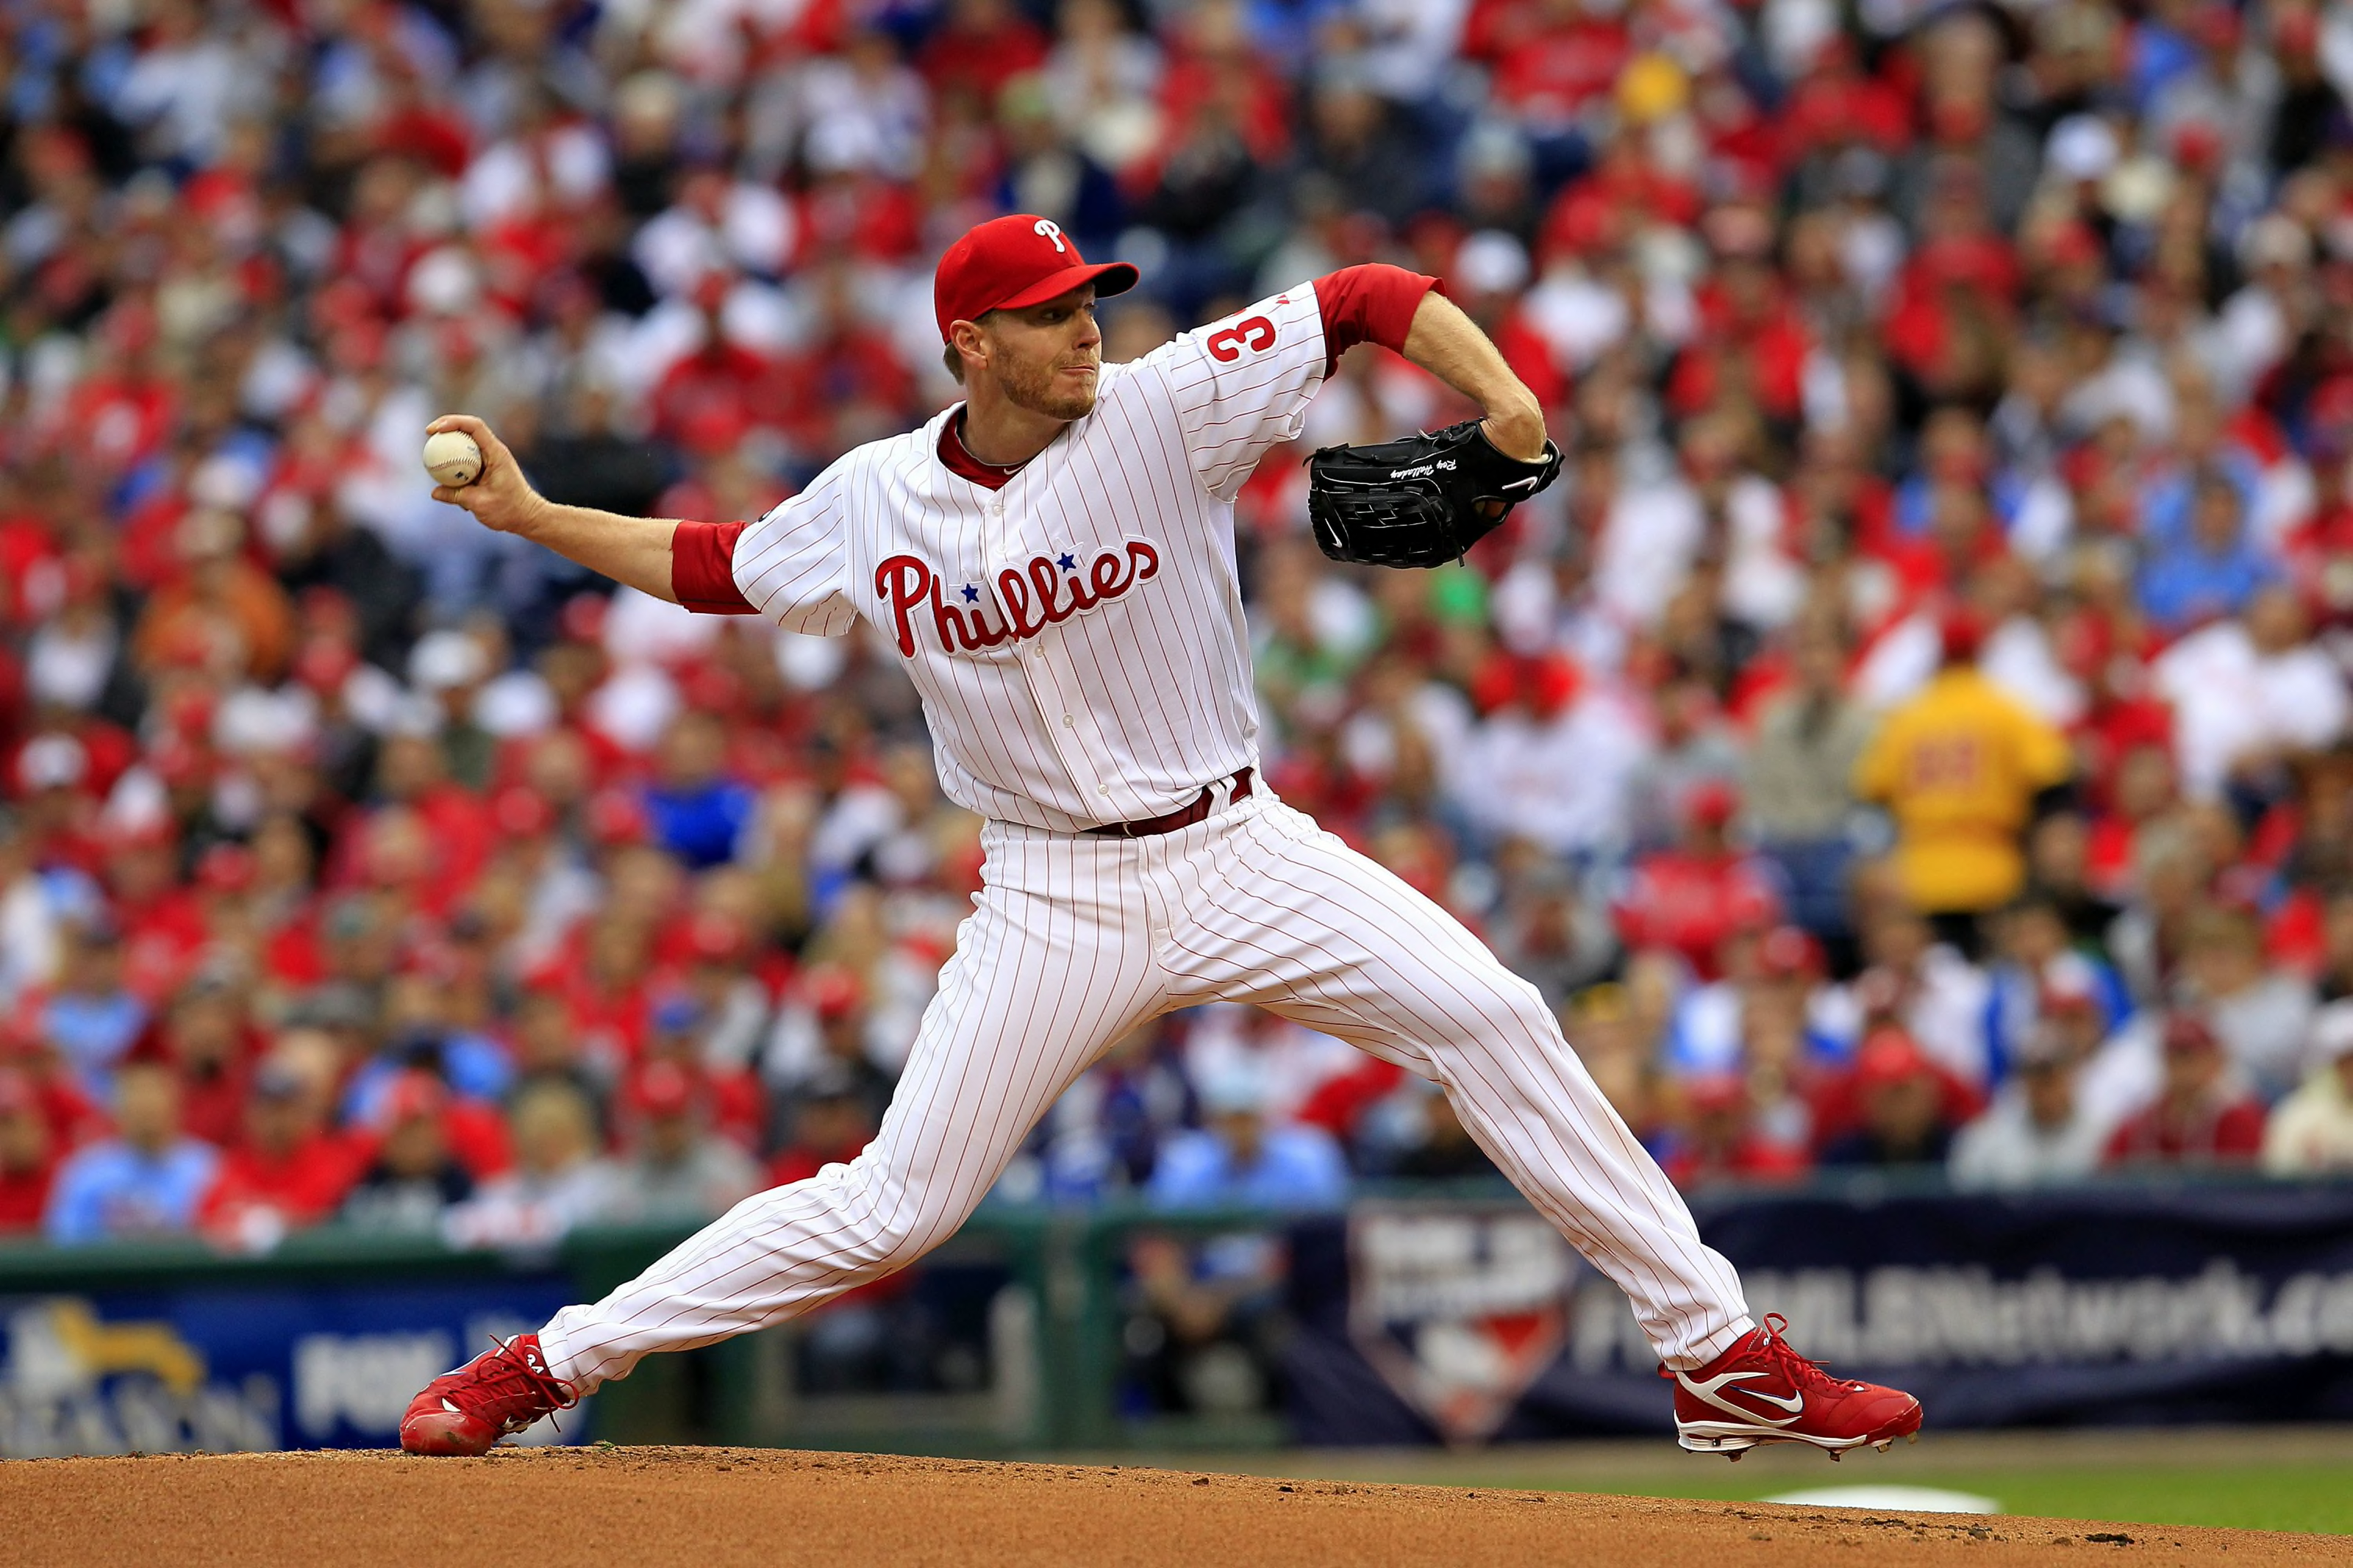 Cliff Lee Vs. Roy Halladay: Which Is the Bigger Postseason Ace